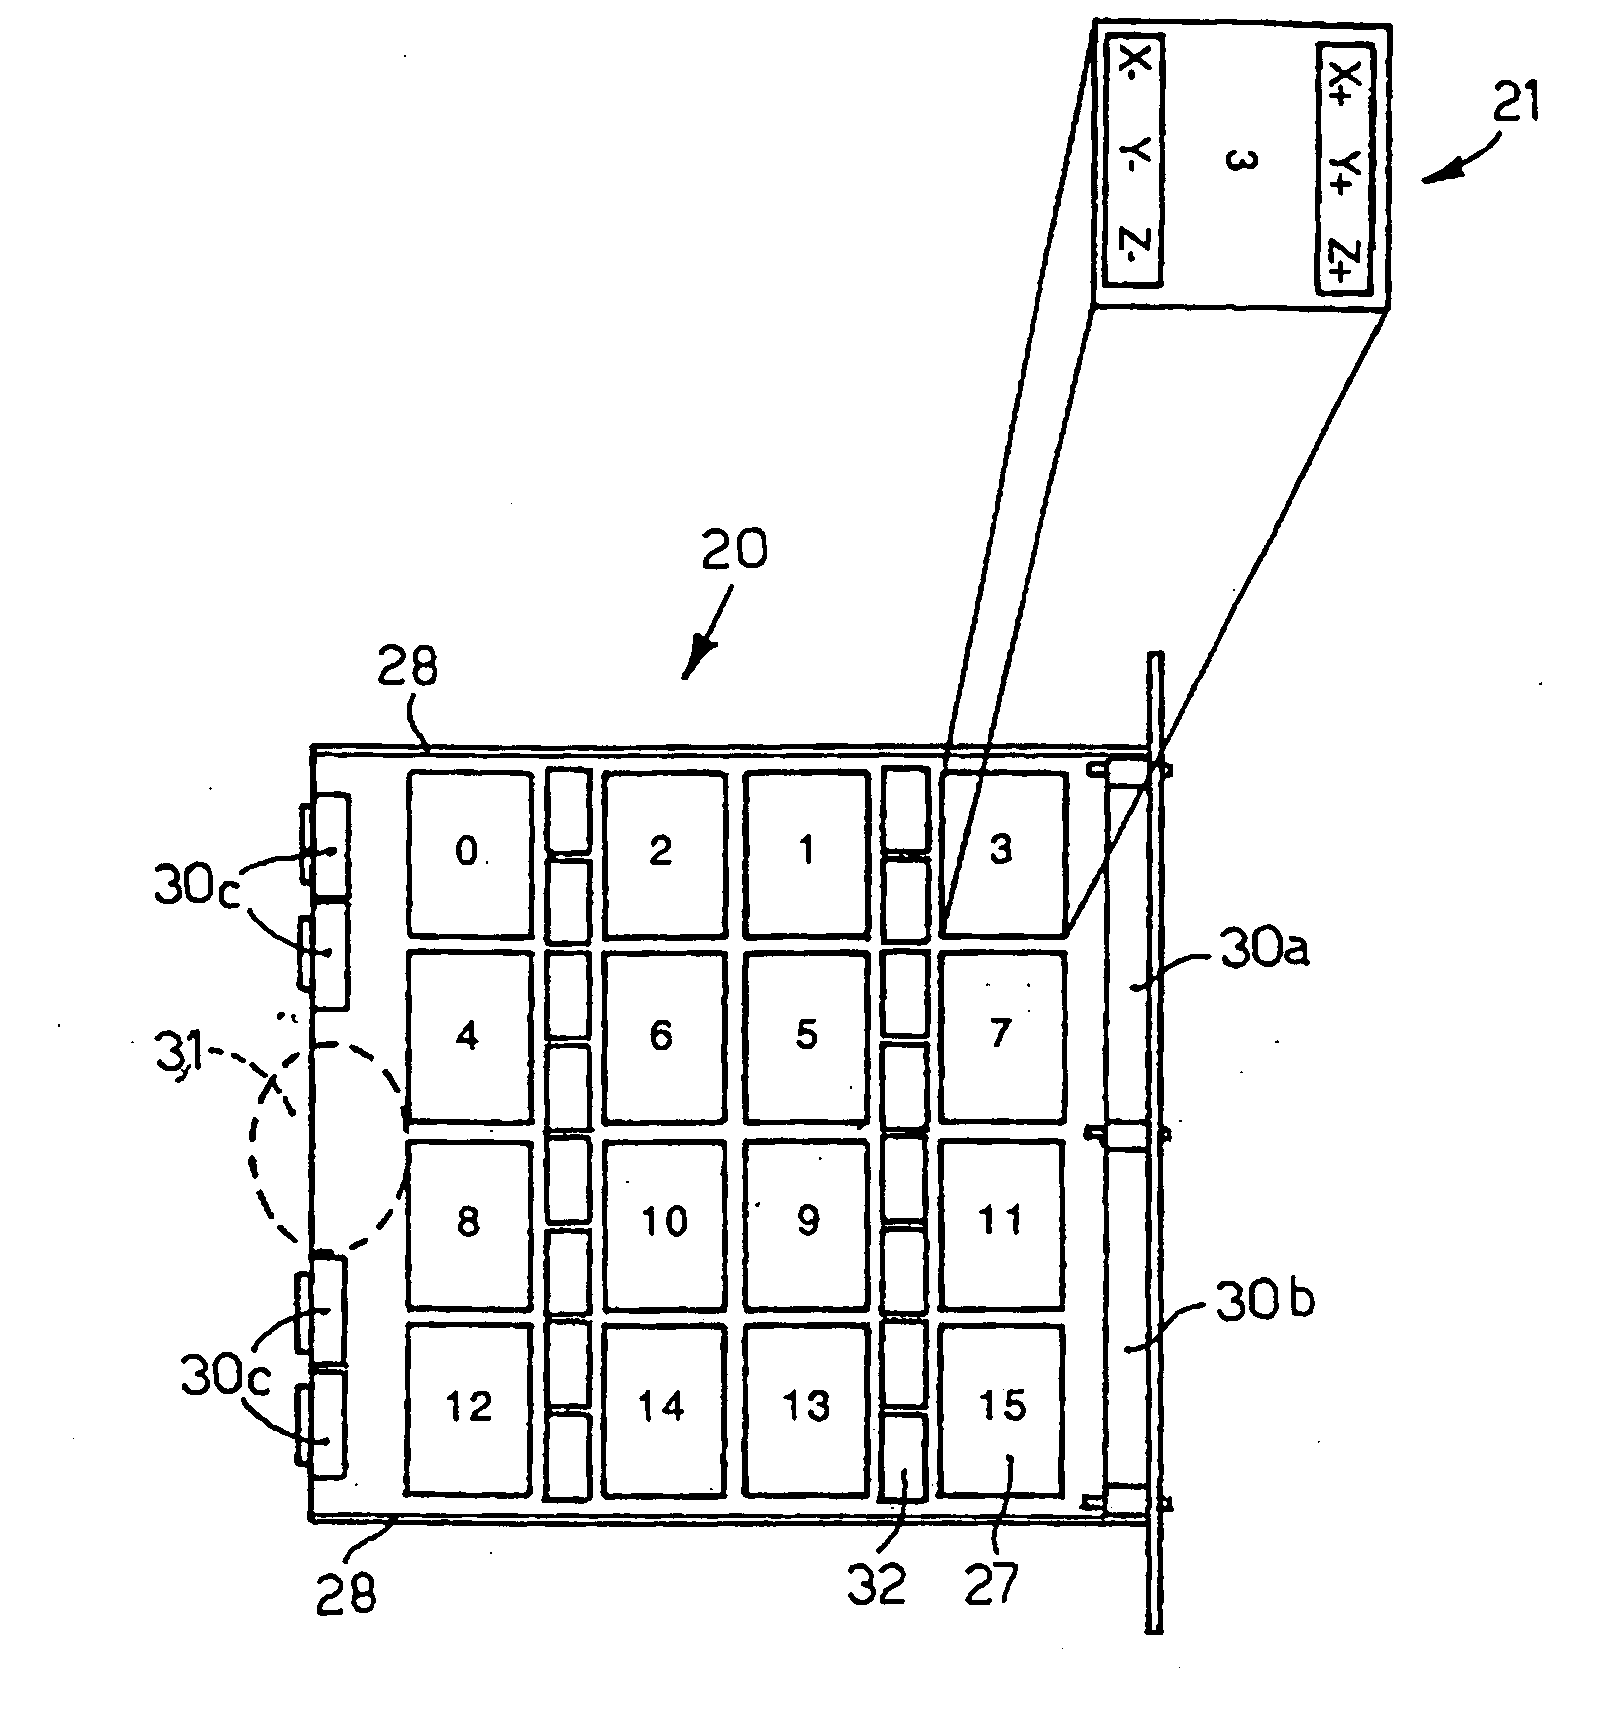 Modular electronic card for a communication network